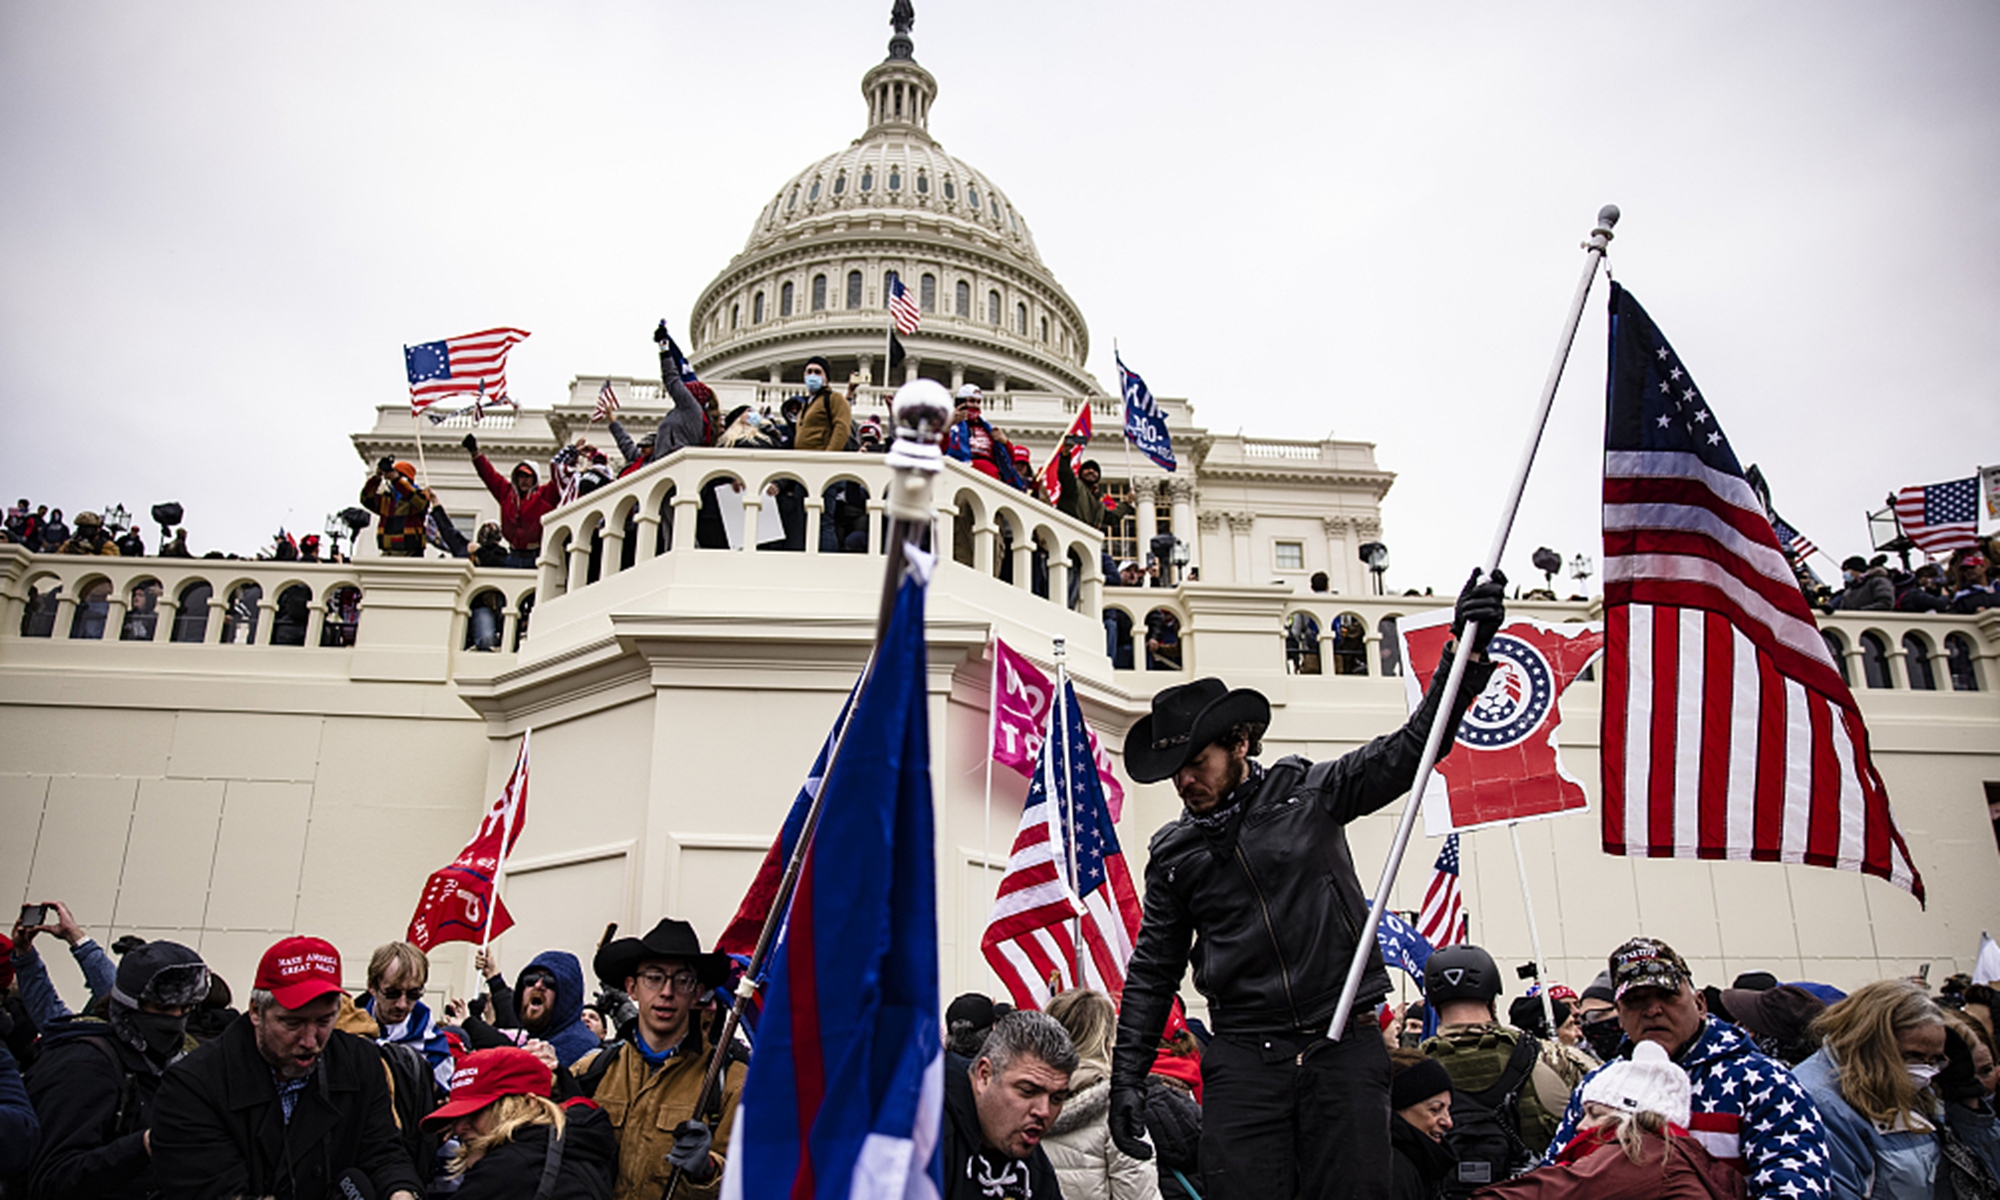 Pro-Trump supporters storm the US Capitol following a rally with President Donald Trump on January 6, 2021 in Washington, DC. Trump supporters gathered in the nation's capital to protest the ratification of President-elect Joe Biden's Electoral College victory over President Trump in the 2020 election. Photo: Samuel Corum/Getty Images/VCG